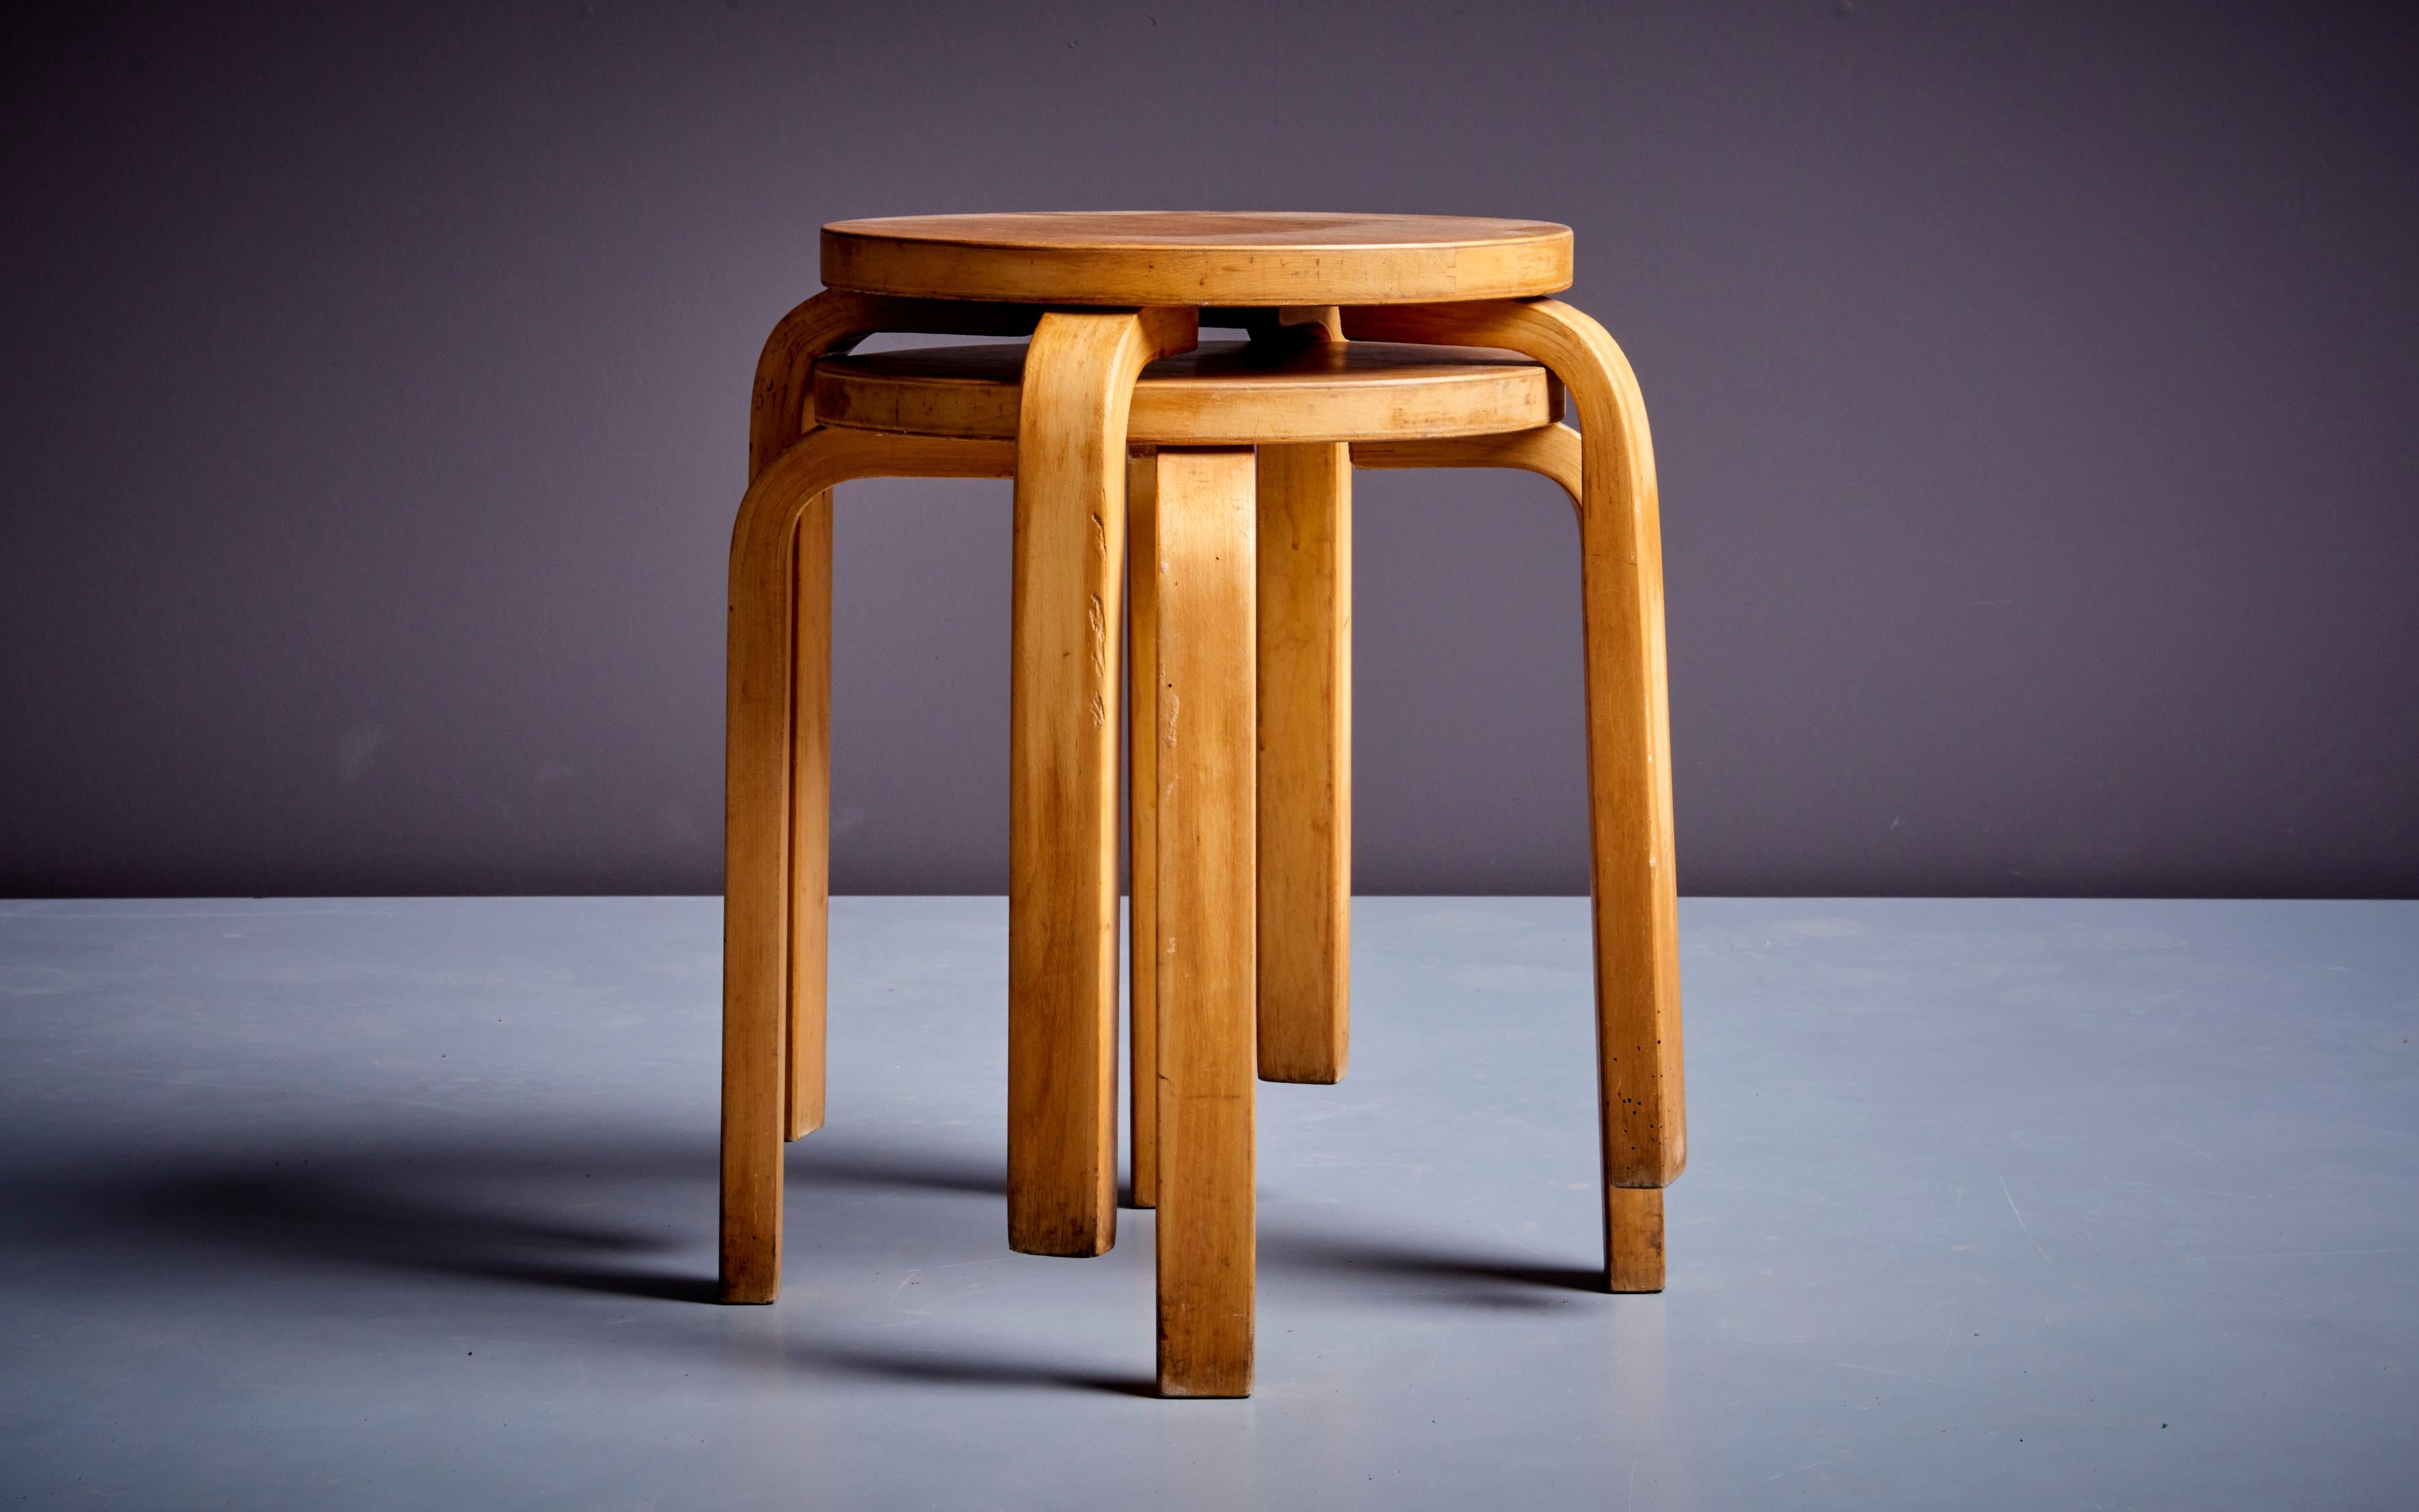 Finnish Set of 2 Early Alvar Aalto Stools, Finland, 1950's For Sale